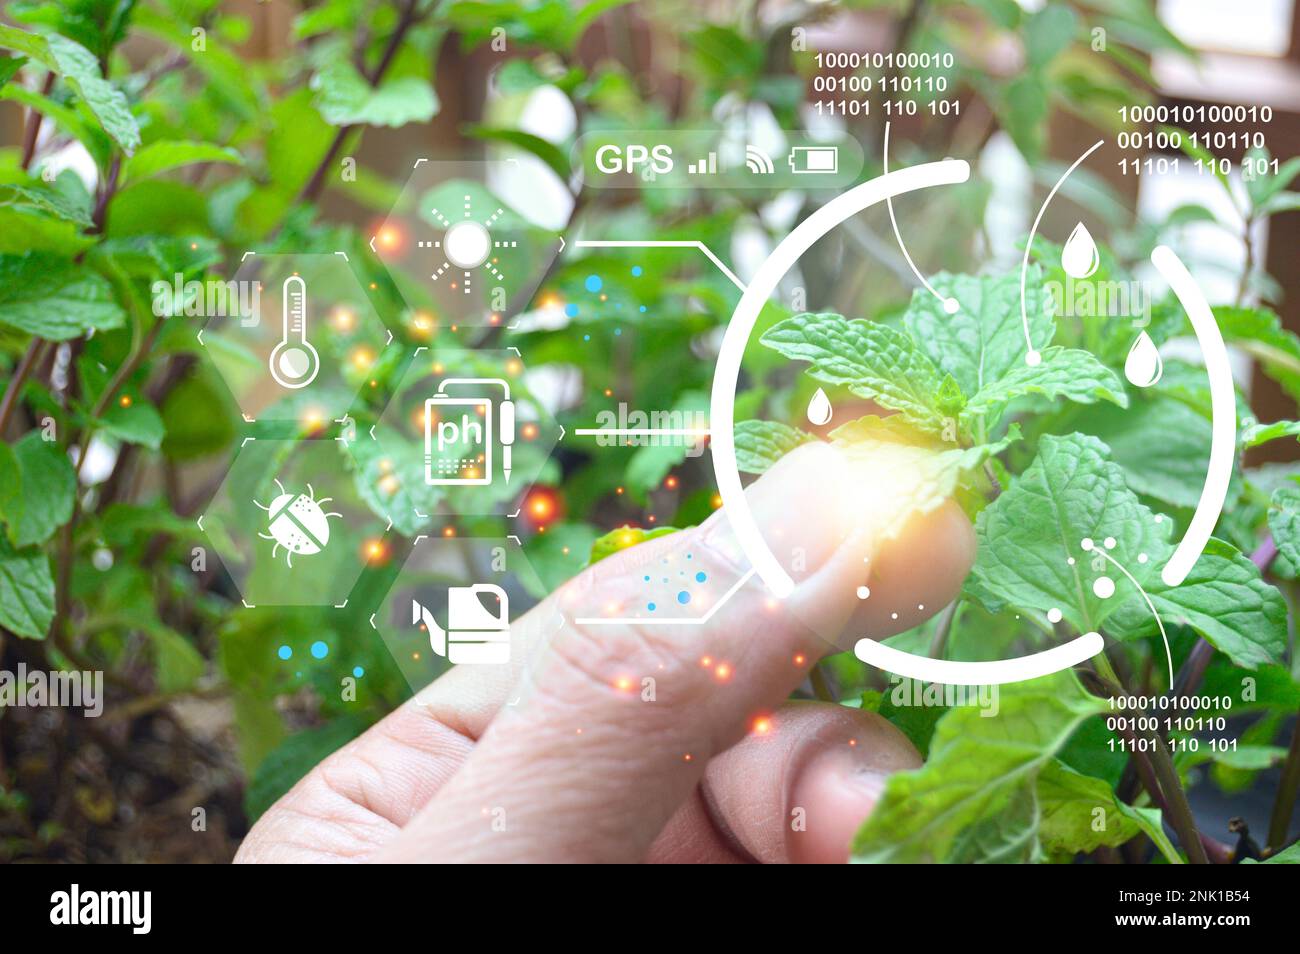 The concept of new farming or smart farming, agricultural technology Stock Photo